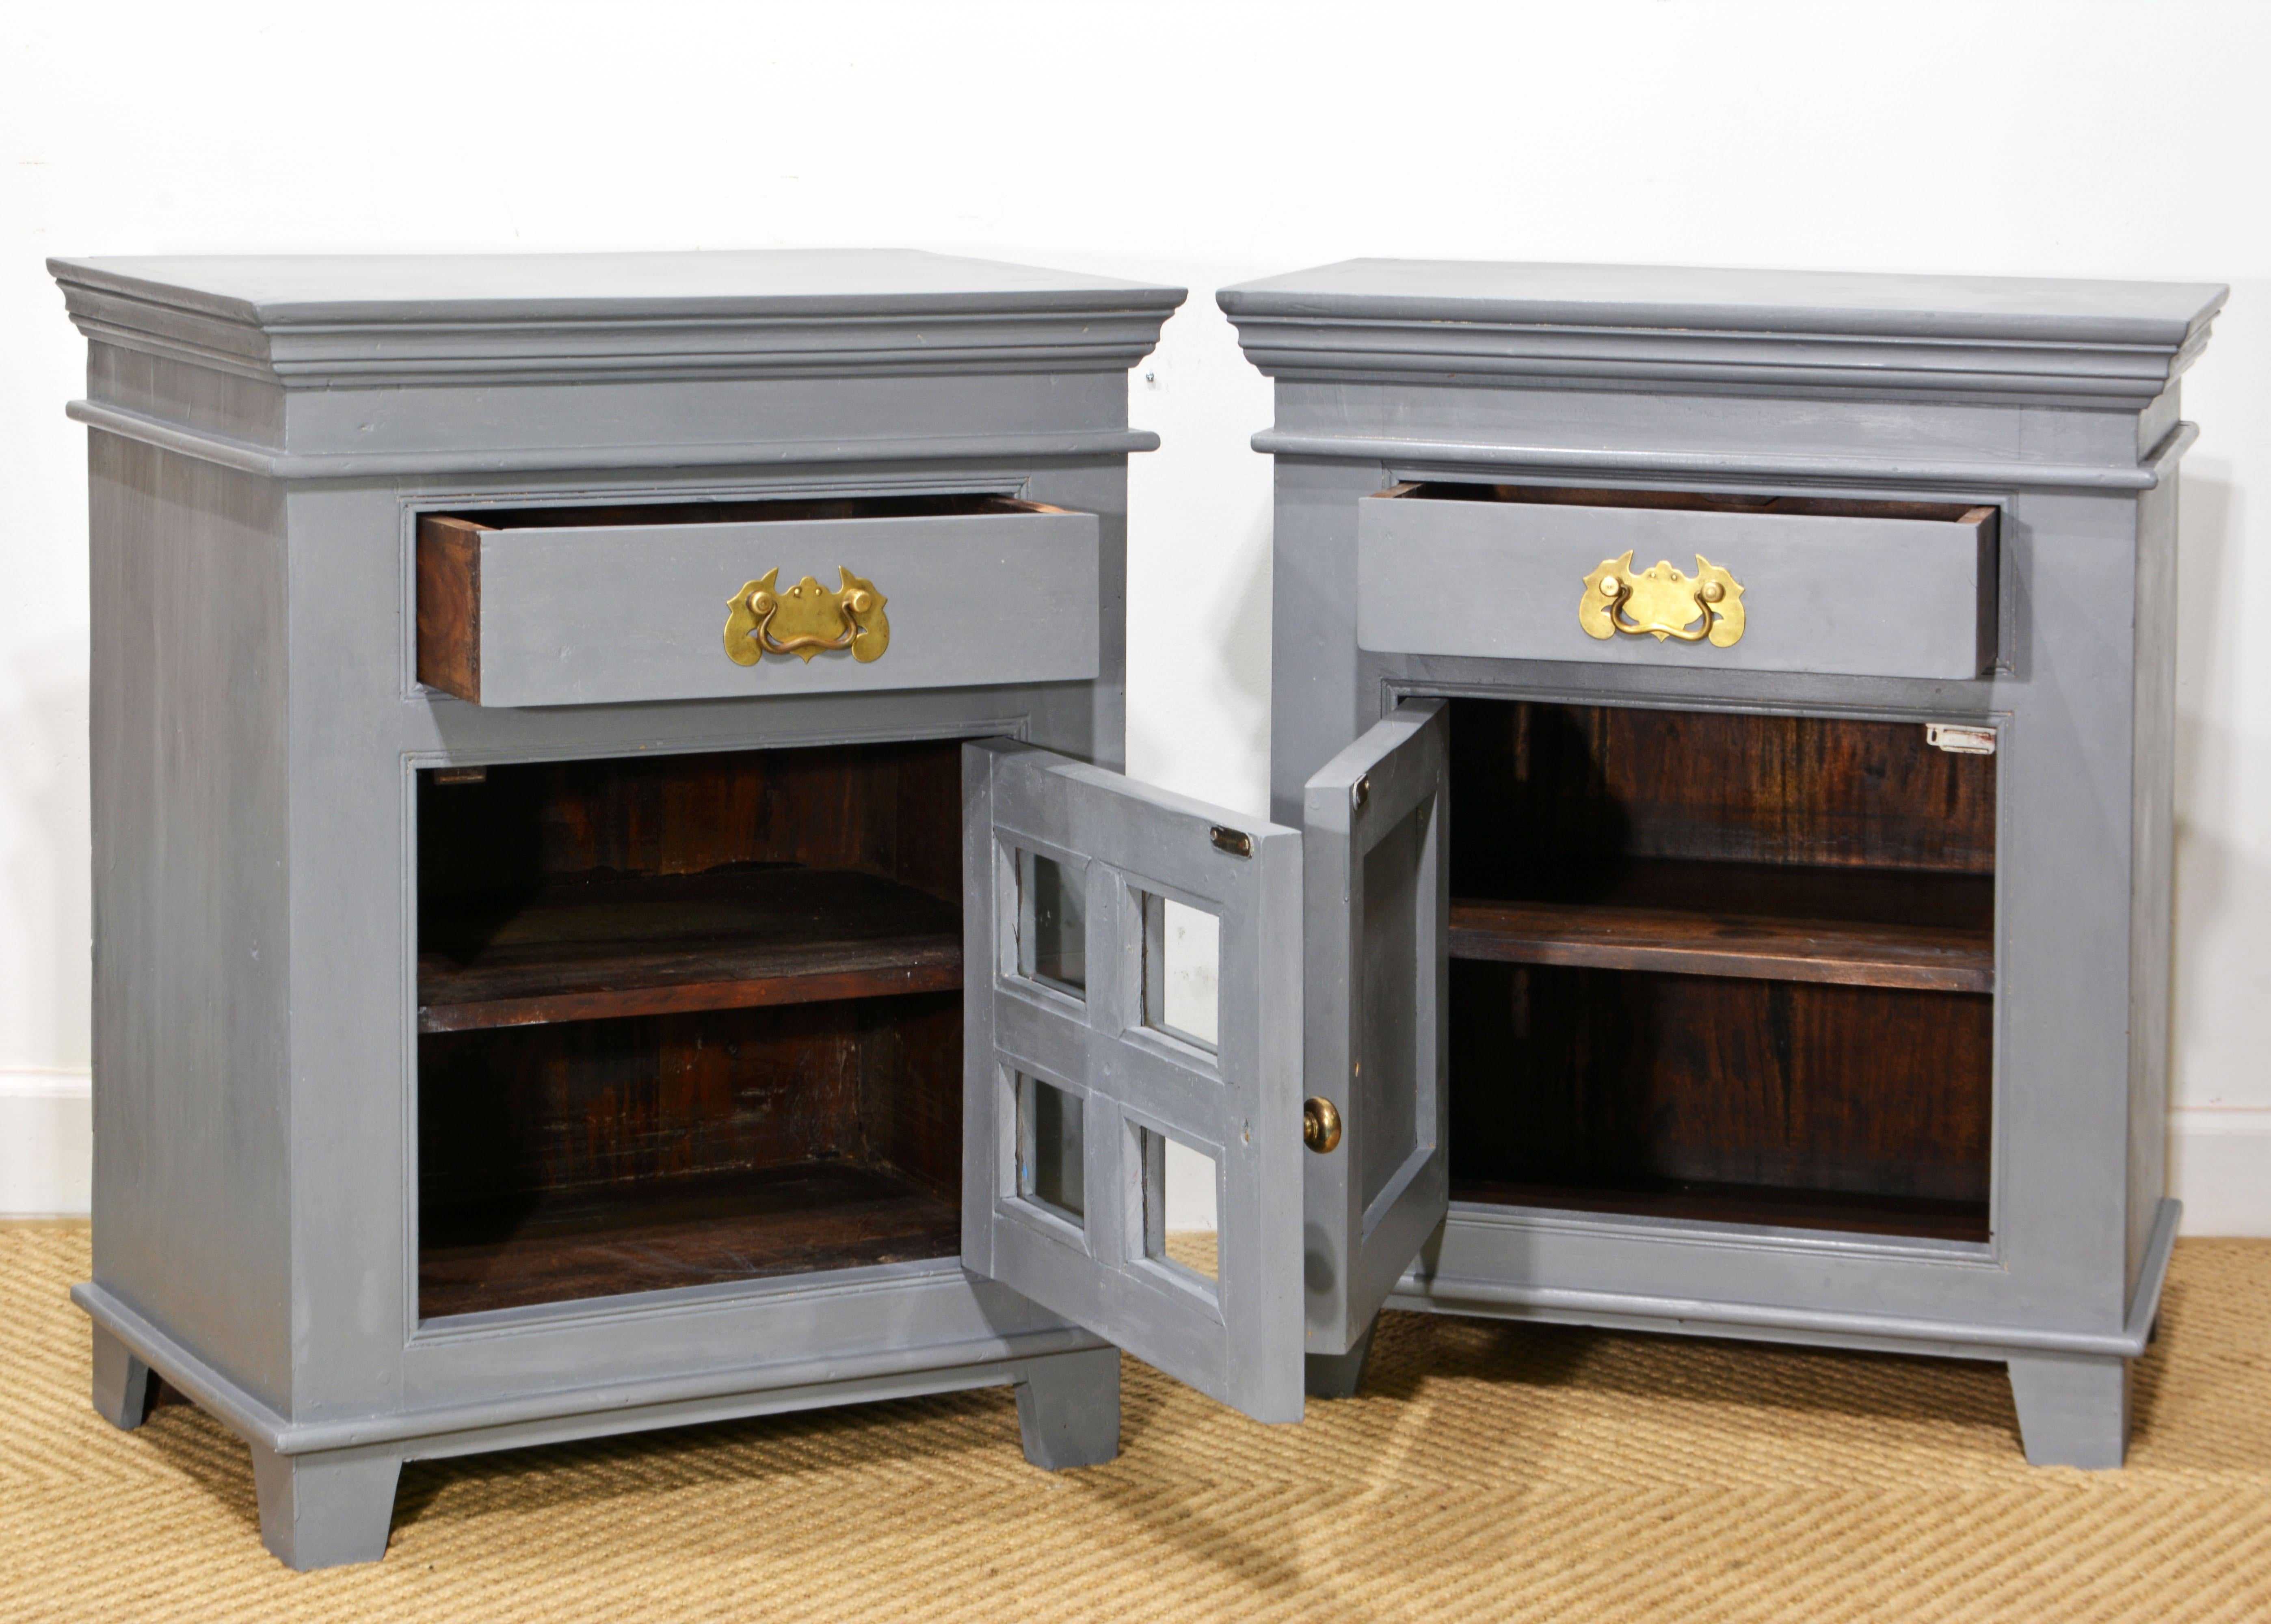 This almost pair of Anglo-Indian bedside cabinets or nightstands are made of solid hardwood which has later been painted in a 'officer's grey' color and wax buffed creating a subtle aged and layered look. One of the cabinets has had glass panels